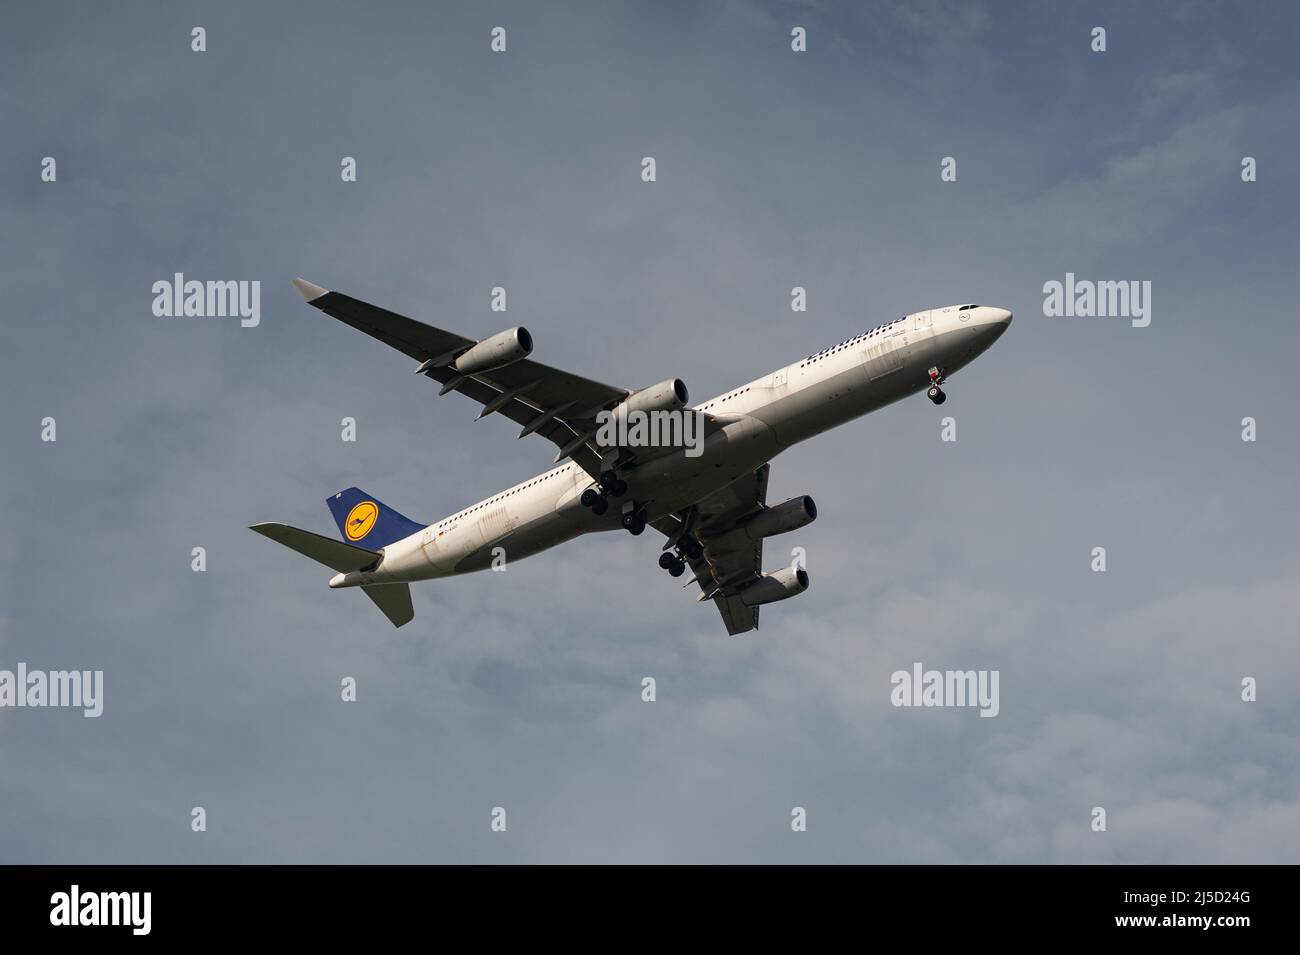 June 30, 2021, Singapore, Republic of Singapore, Asia - A Lufthansa Airbus A340-300 passenger aircraft registered D-AIGO and named Offenbach on approach to Changi International Airport during the ongoing Corona crisis. Lufthansa is a member of the Star Alliance airline alliance. [automated translation] Stock Photo